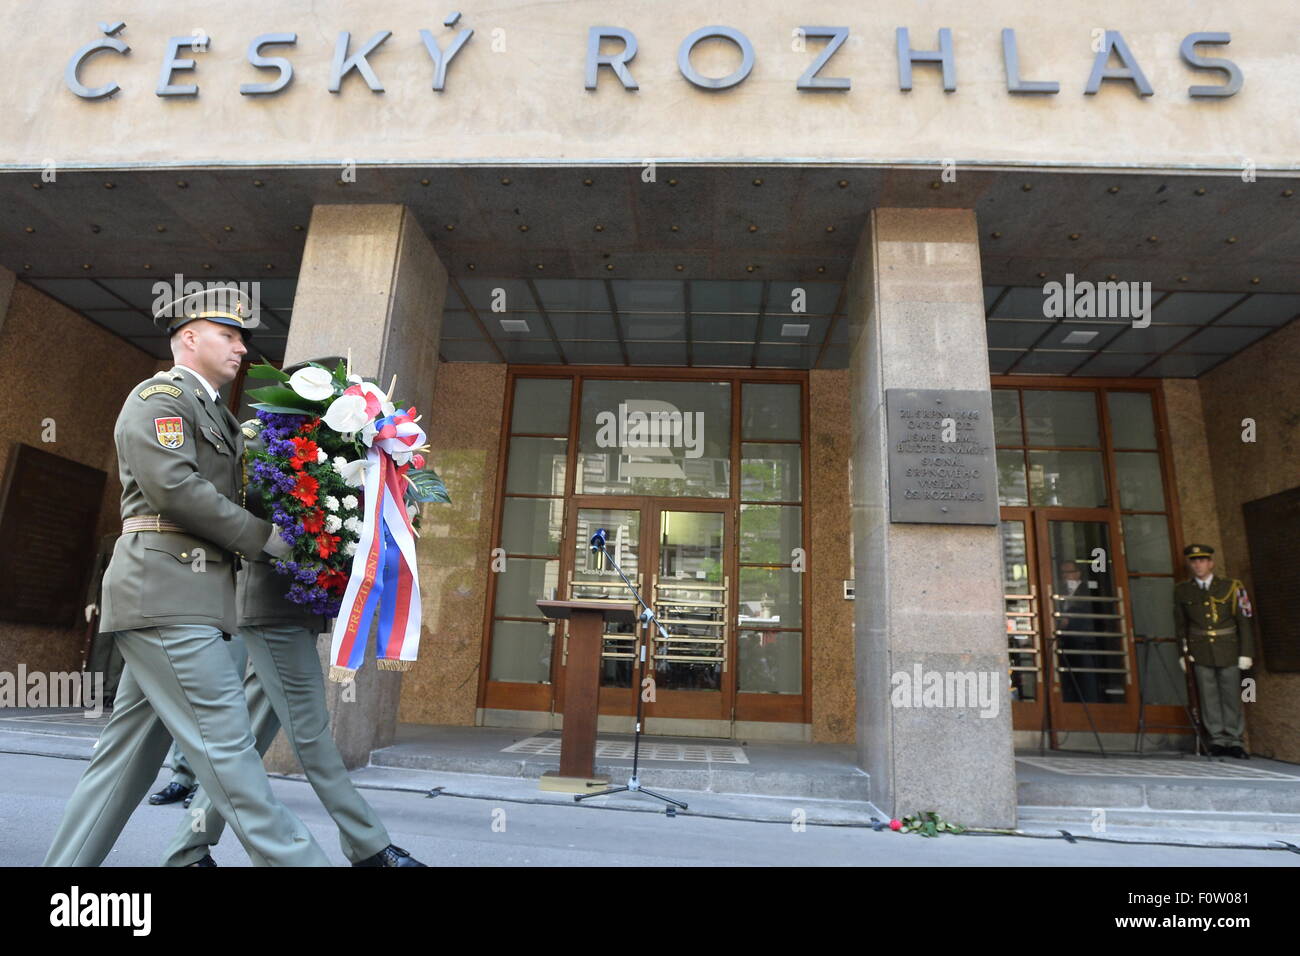 Prague, Czech Republic. 21st Aug, 2015. Ceremonial event marking 47th anniversary of the deaths of people killed during the country's occupation by Warsaw Pact troops in 1968 took place in front of the Czech Radio building, in Prague, August 21, 2015. Credit:  Katerina Sulova/CTK Photo/Alamy Live News Stock Photo